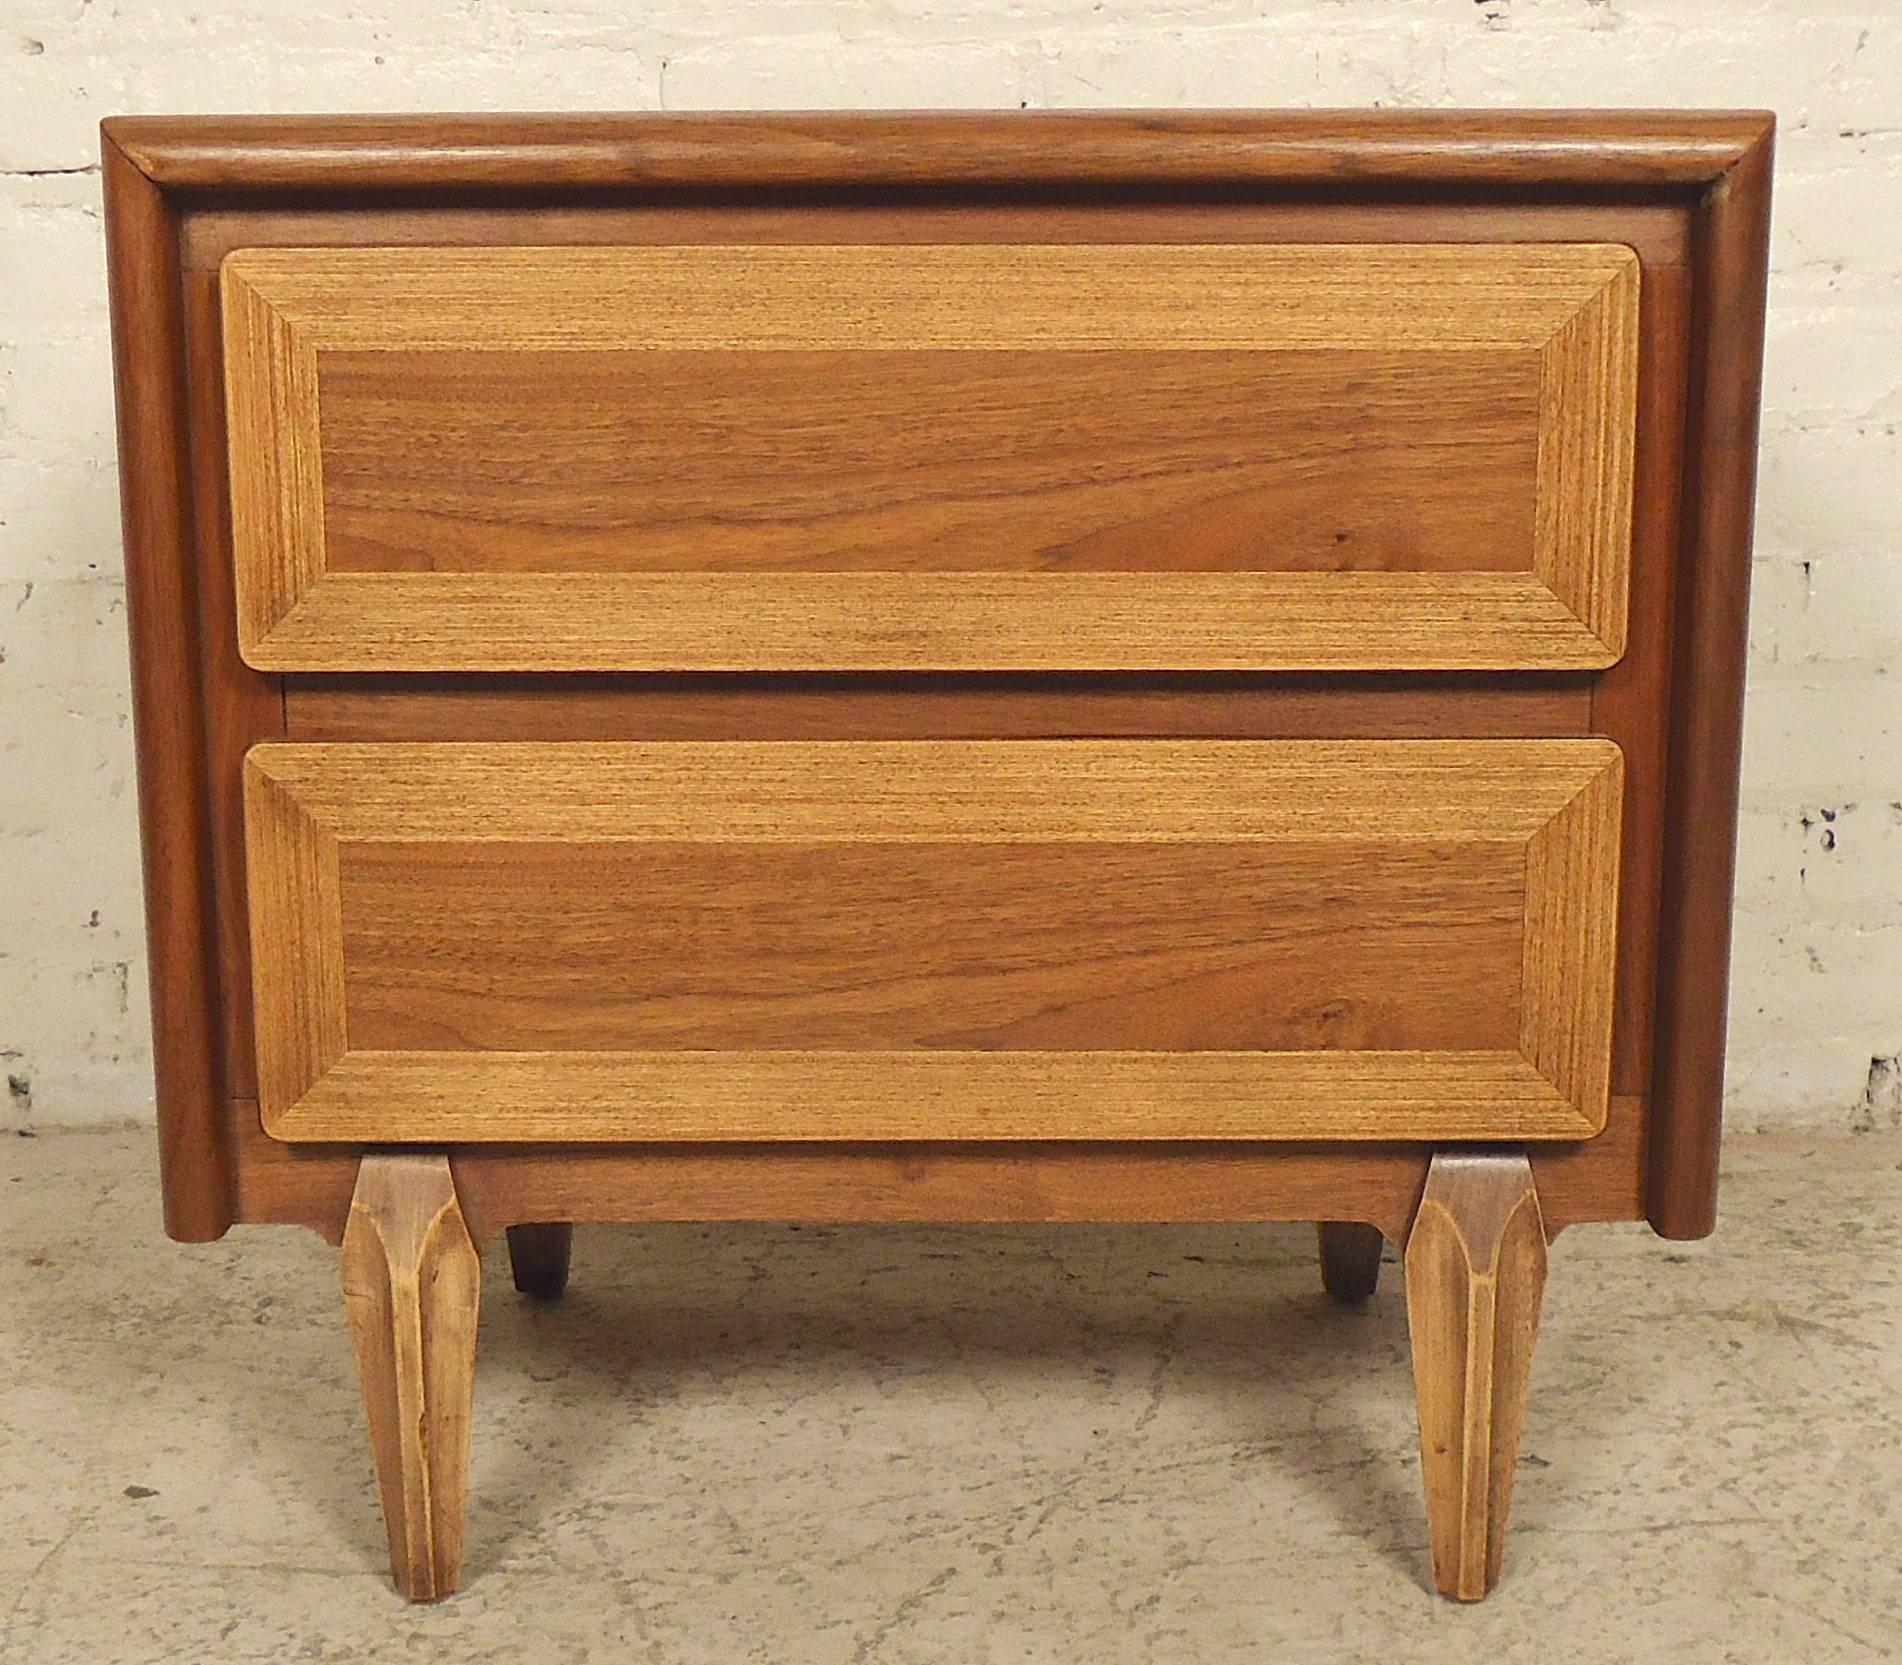 American made end table with two drawers. Walnut grain with oak trim and legs.

(Please confirm item location - NY or NJ - with dealer.)
  